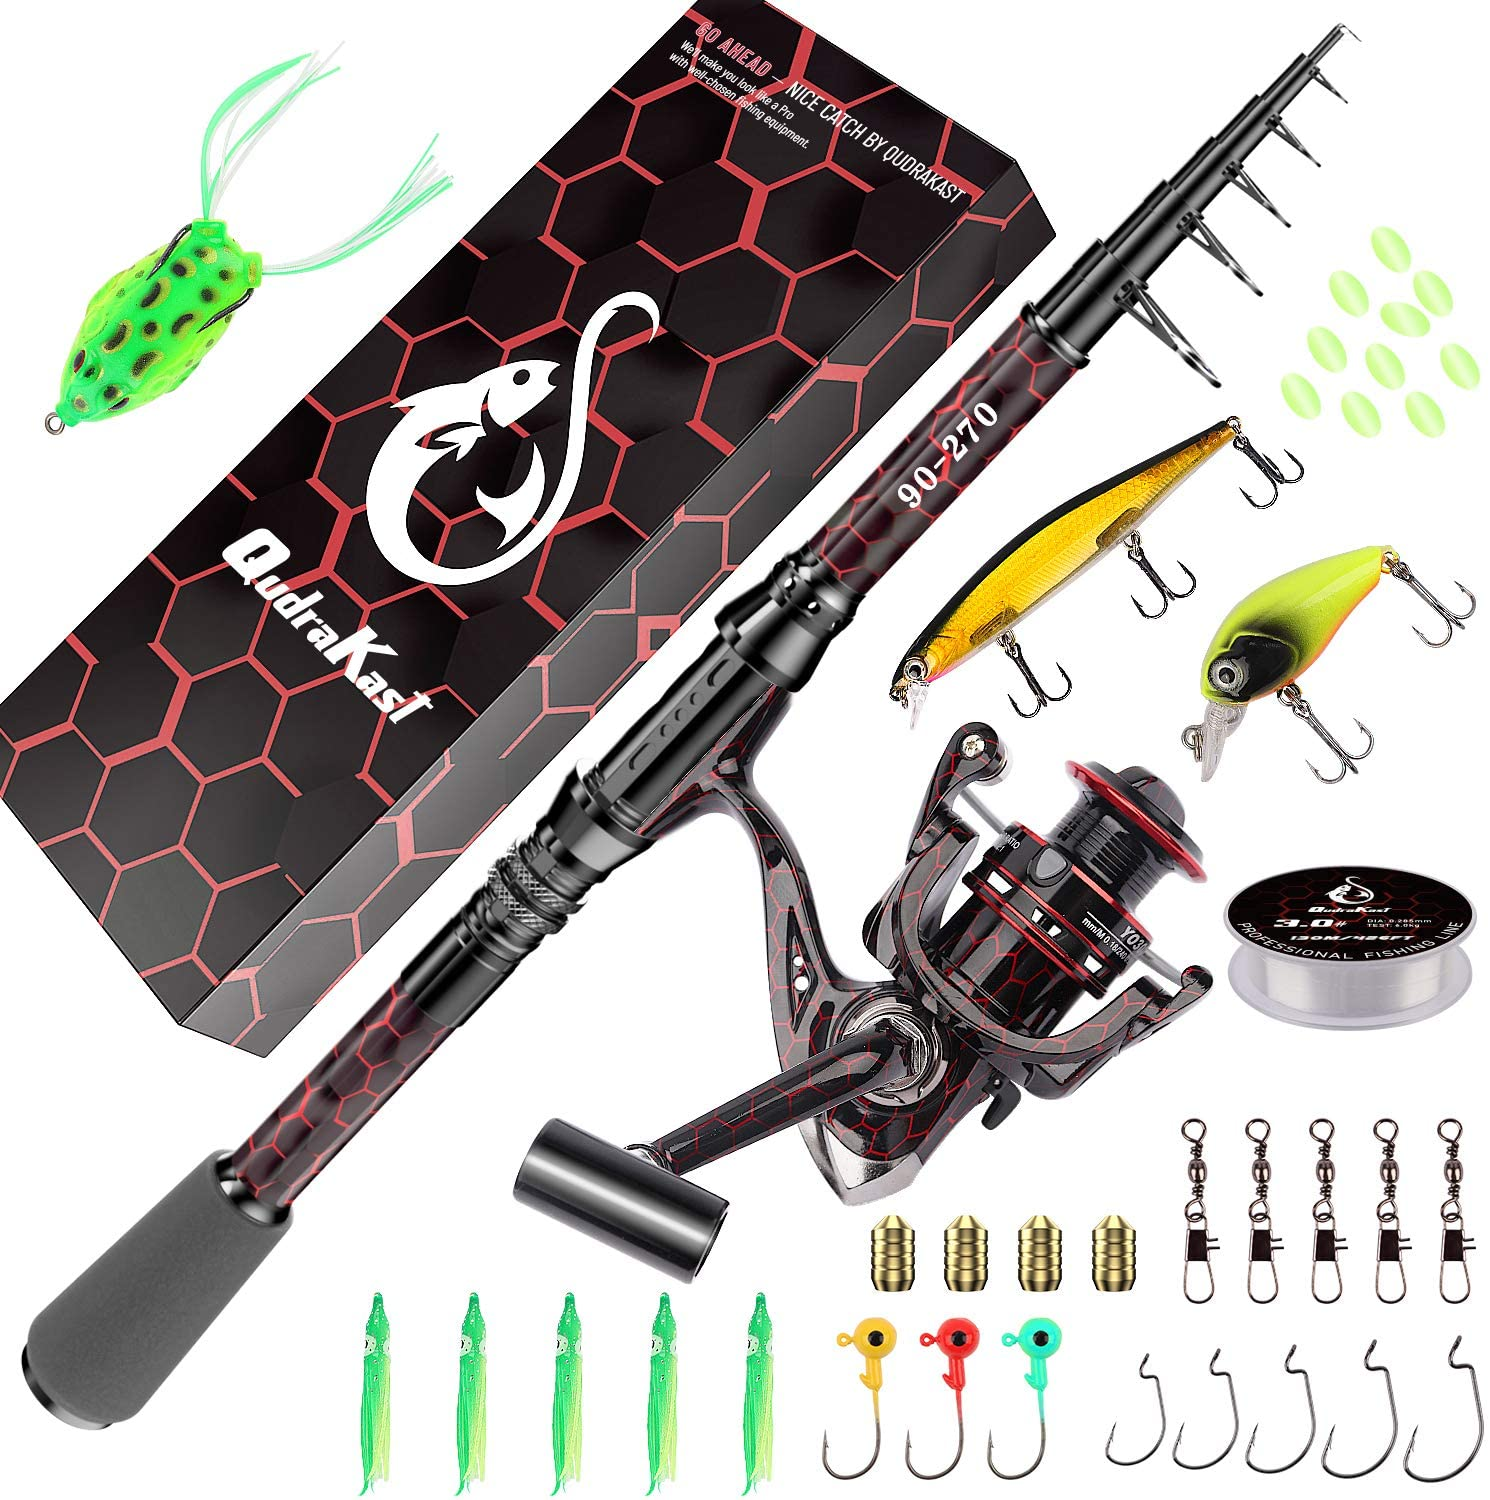  PLUSINNO Kids Fishing Pole with Spincast Reel Telescopic Fishing  Rod Combo Full Kits for Boys, Girls, and Adults(Black, 120cm 47.24In) :  Sports & Outdoors